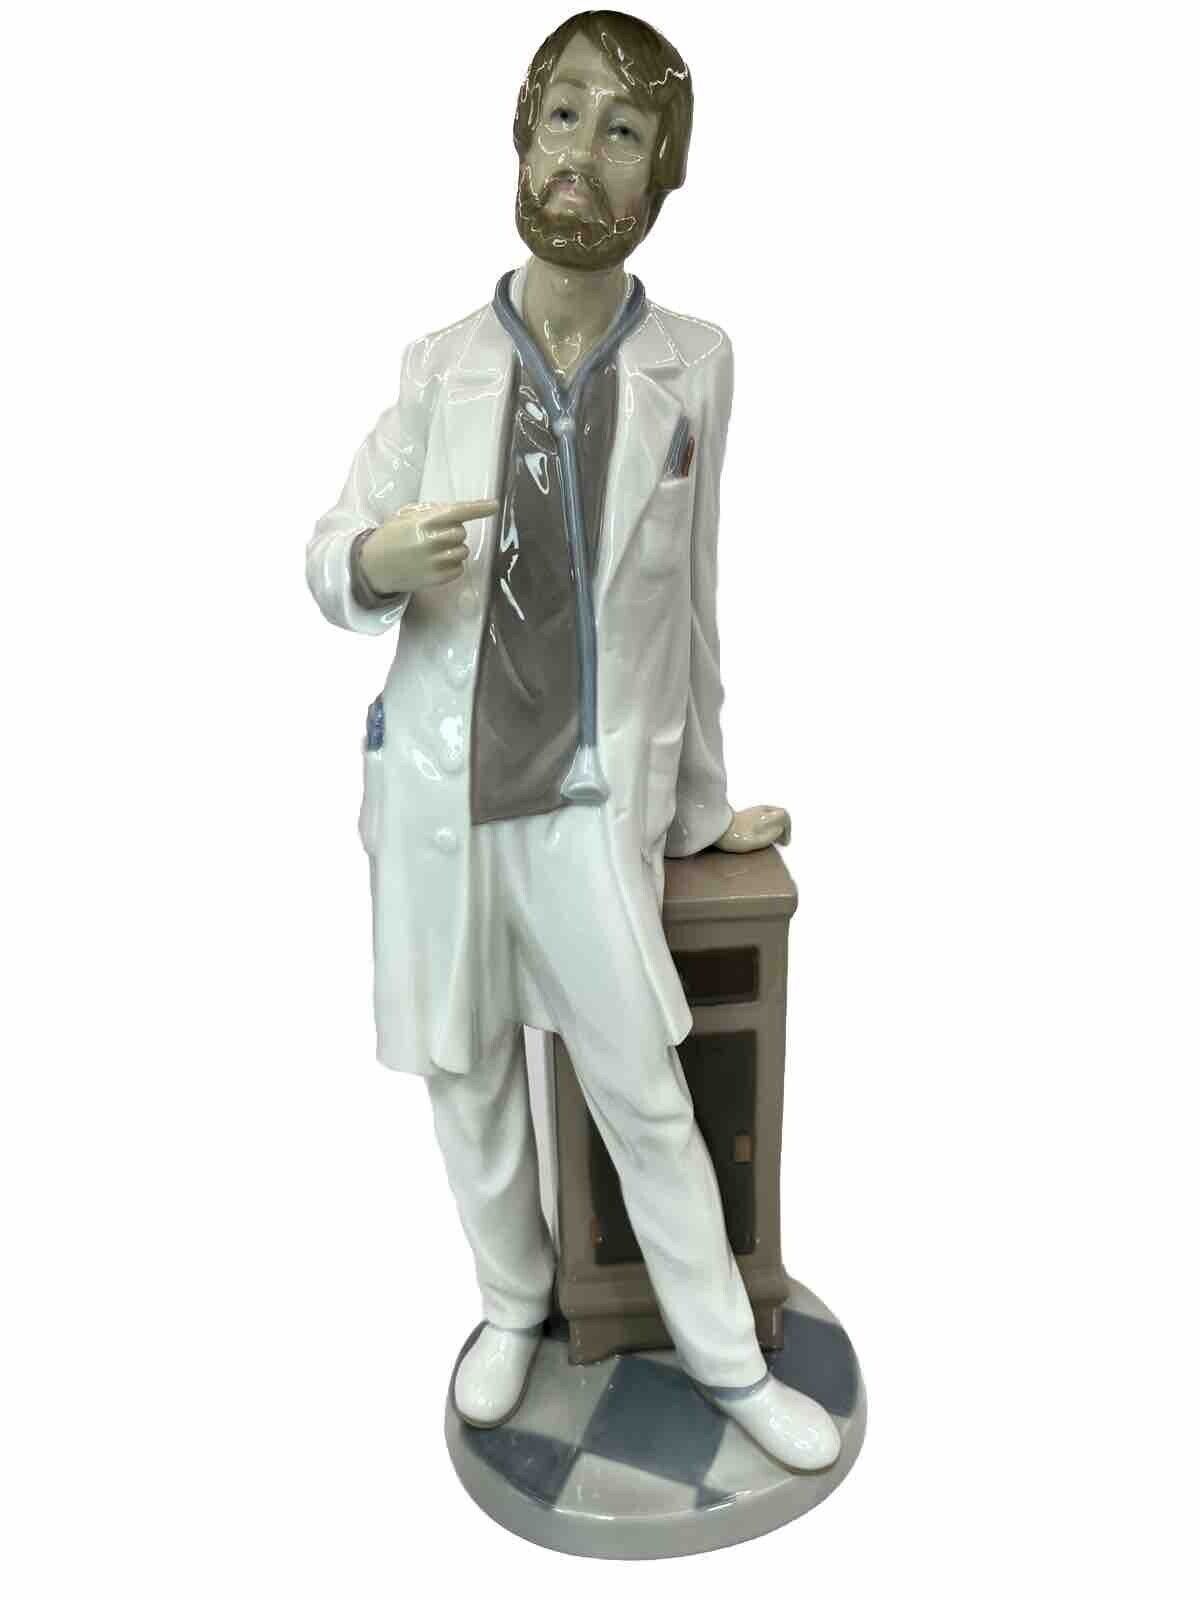 Rare Vtg 1992 Lladro Bearded Male Physician Figurine 5948 Retired Mint Condition